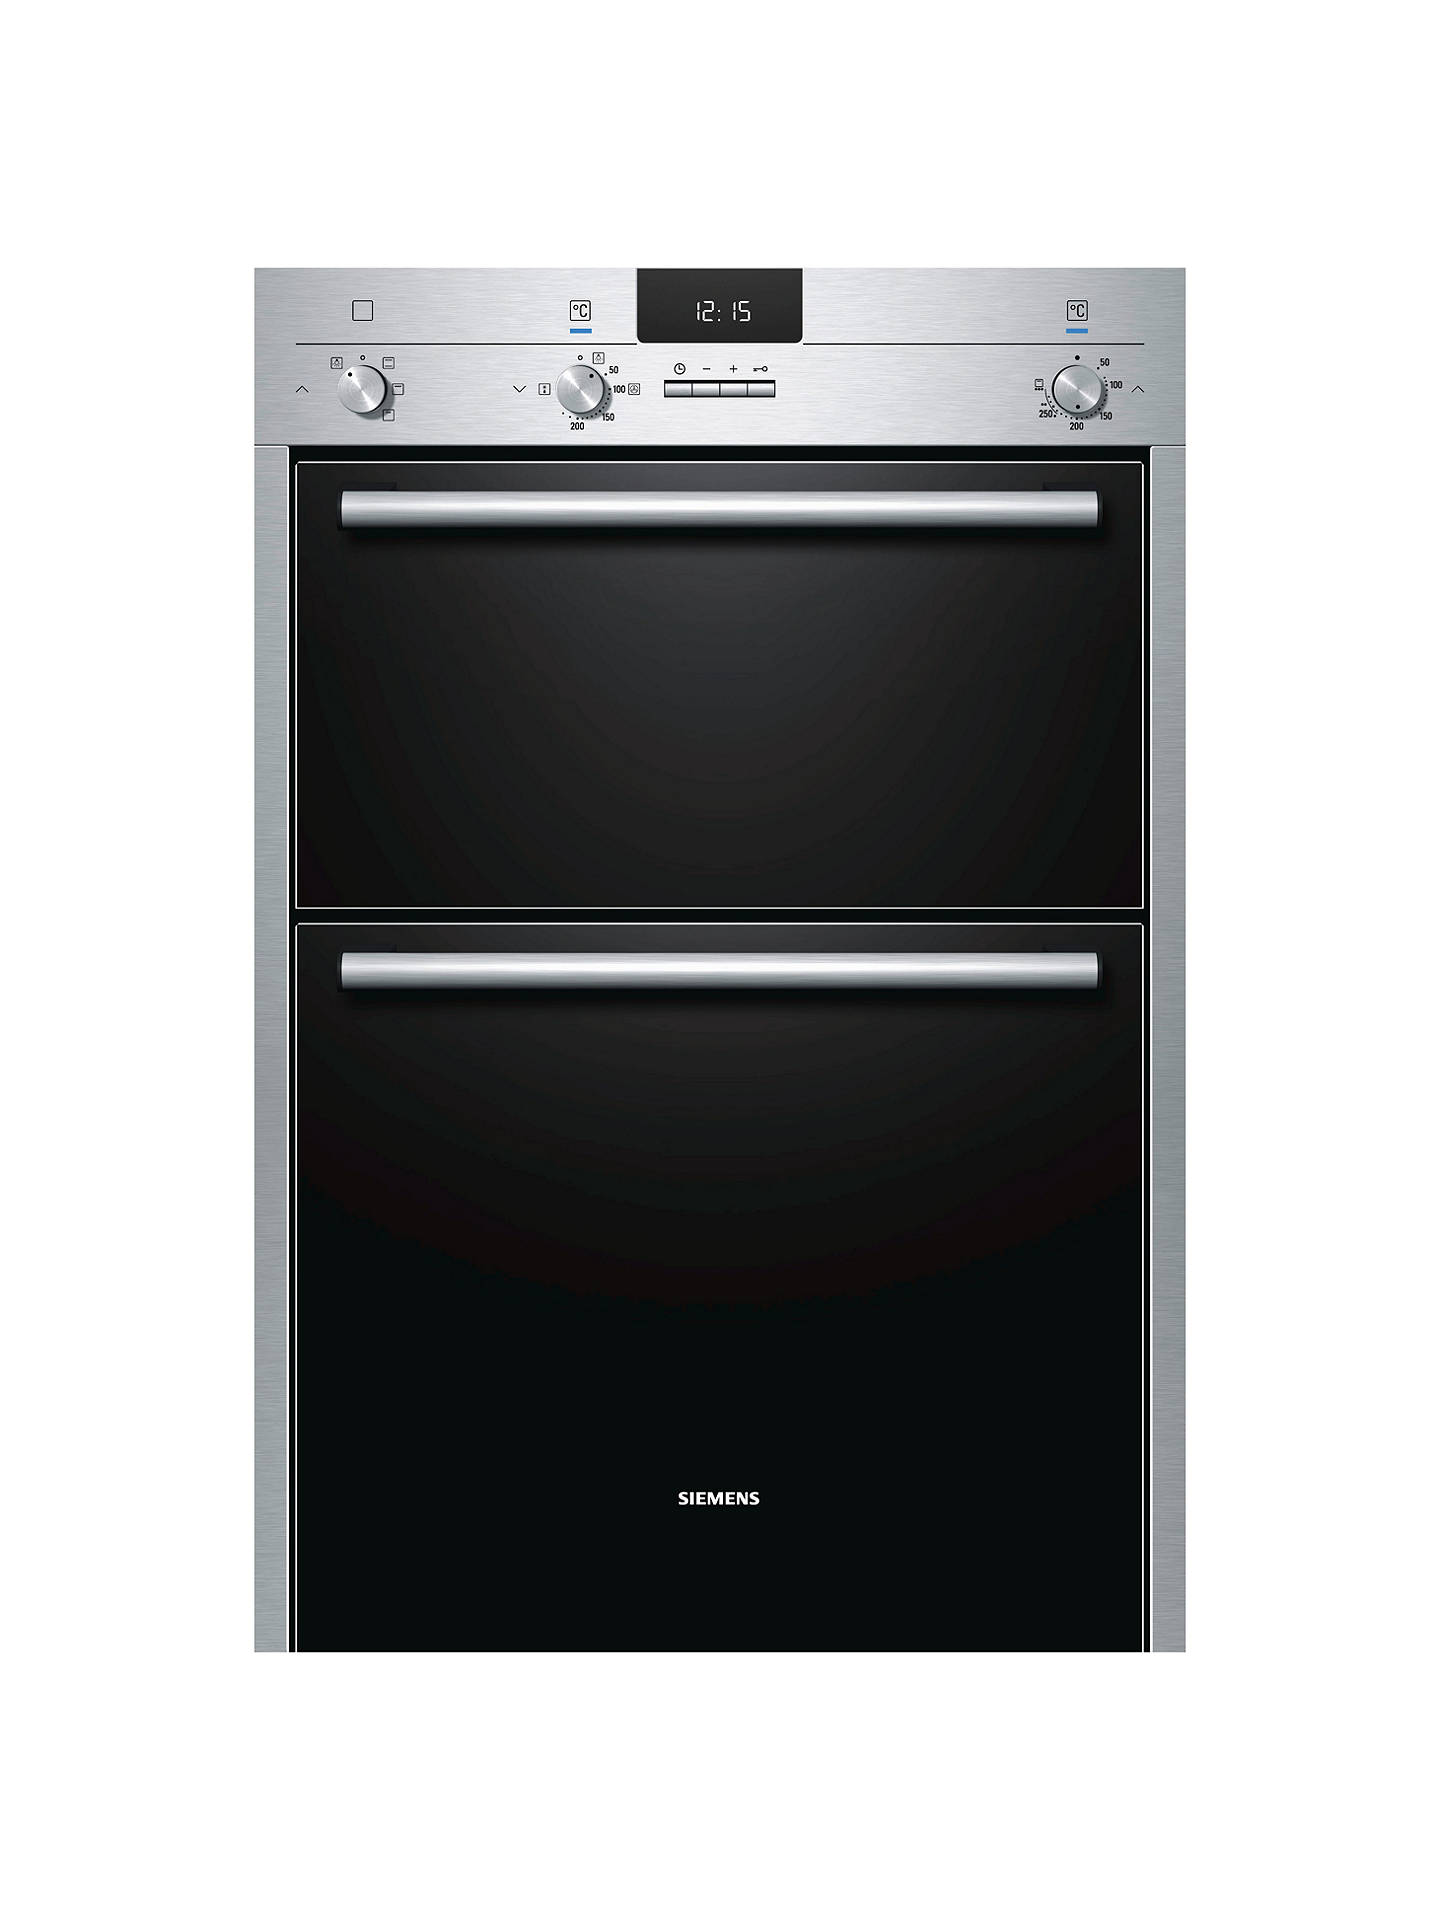 Siemens double oven with microwave